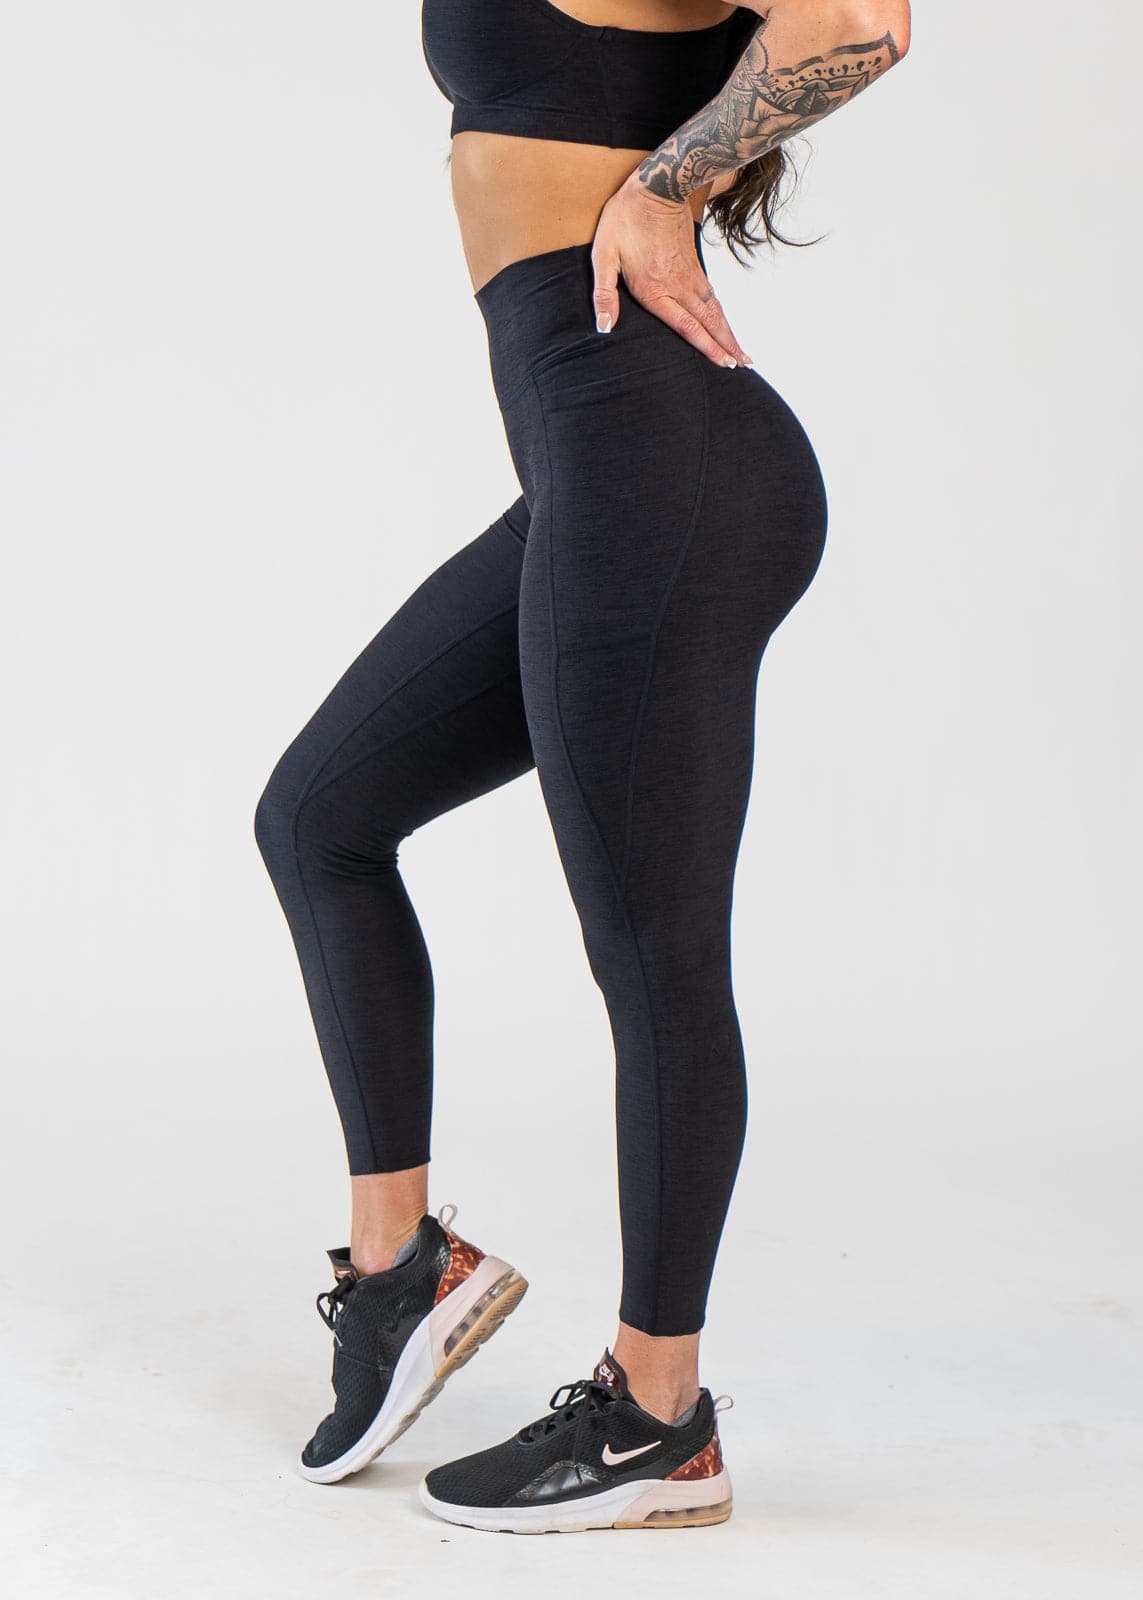 Chest Down Side View With One Hand on Lower Back Wearing Dream Leggings With Pockets | Black